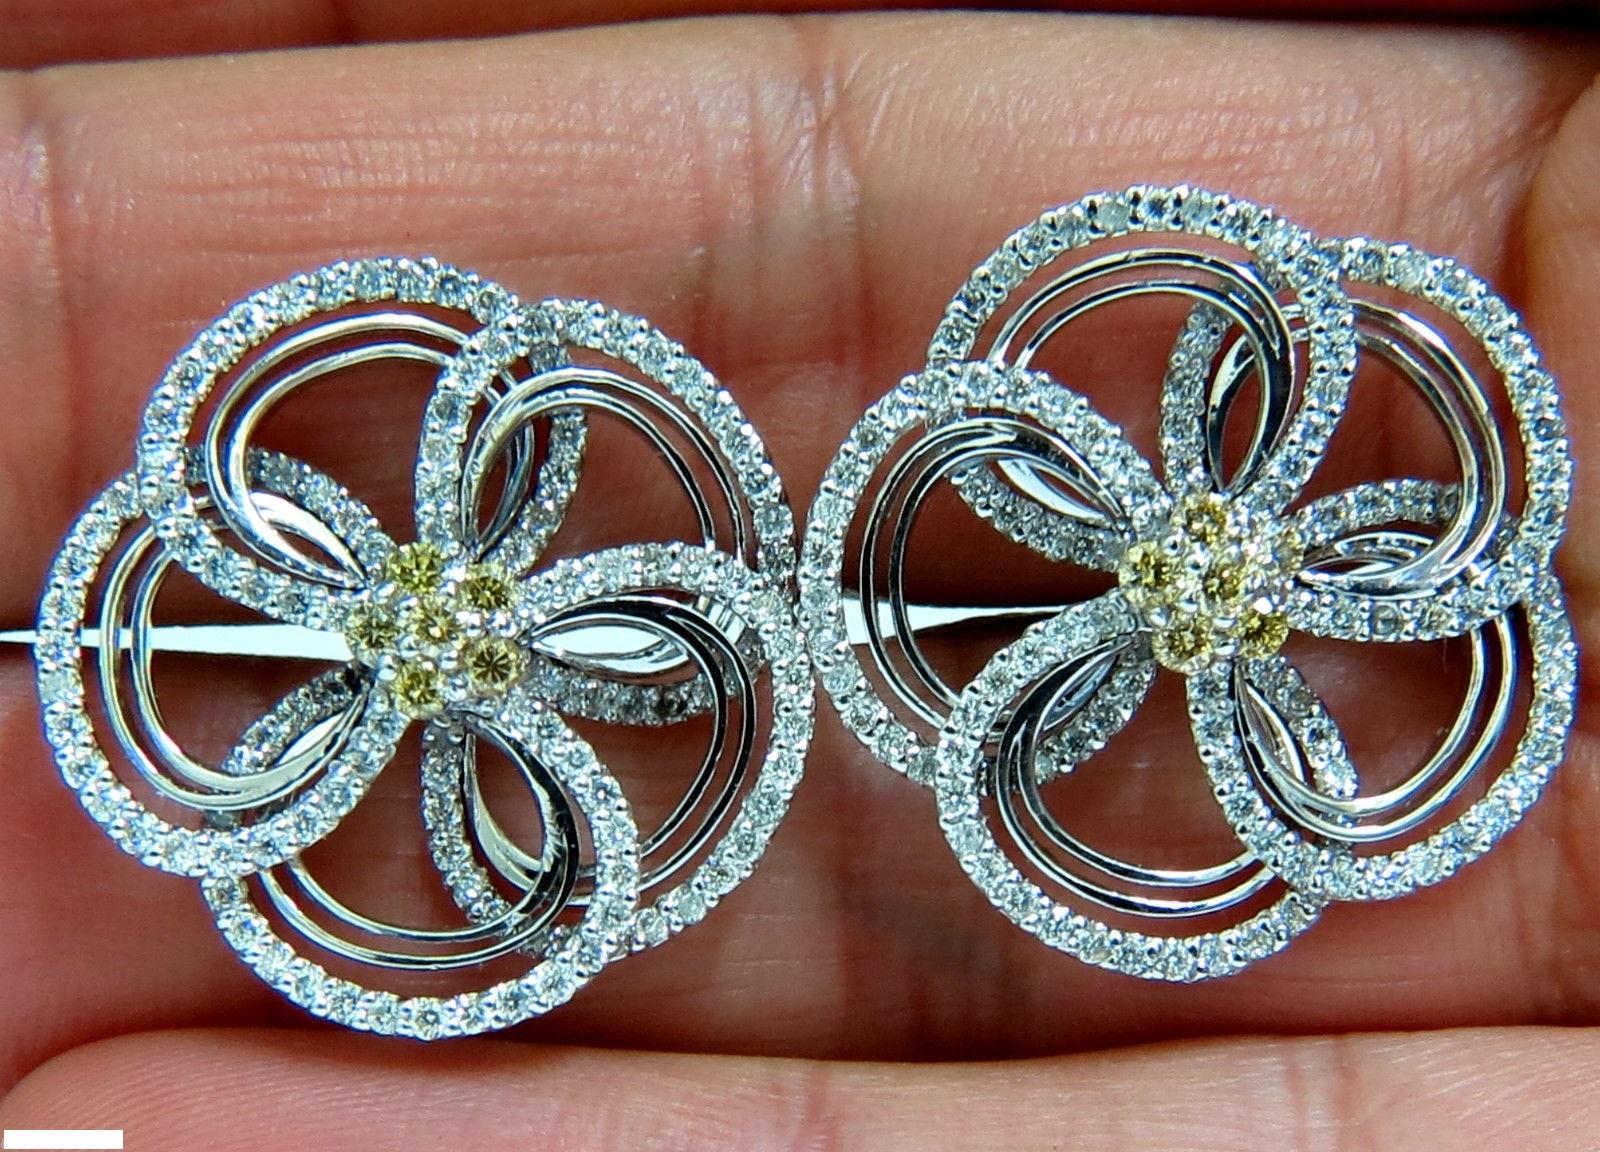 The 3D Crossover Floral Cluster:

Completely handmade



2.00ct. Natural Diamonds

Diamonds, Rounds, full cuts

H-color, Vs-2 clarity.



Additional .40ct. Natural Fancy Yellow diamonds.

Rounds, full cuts.

Vs-2 clarity.

Overall:

1 Inch